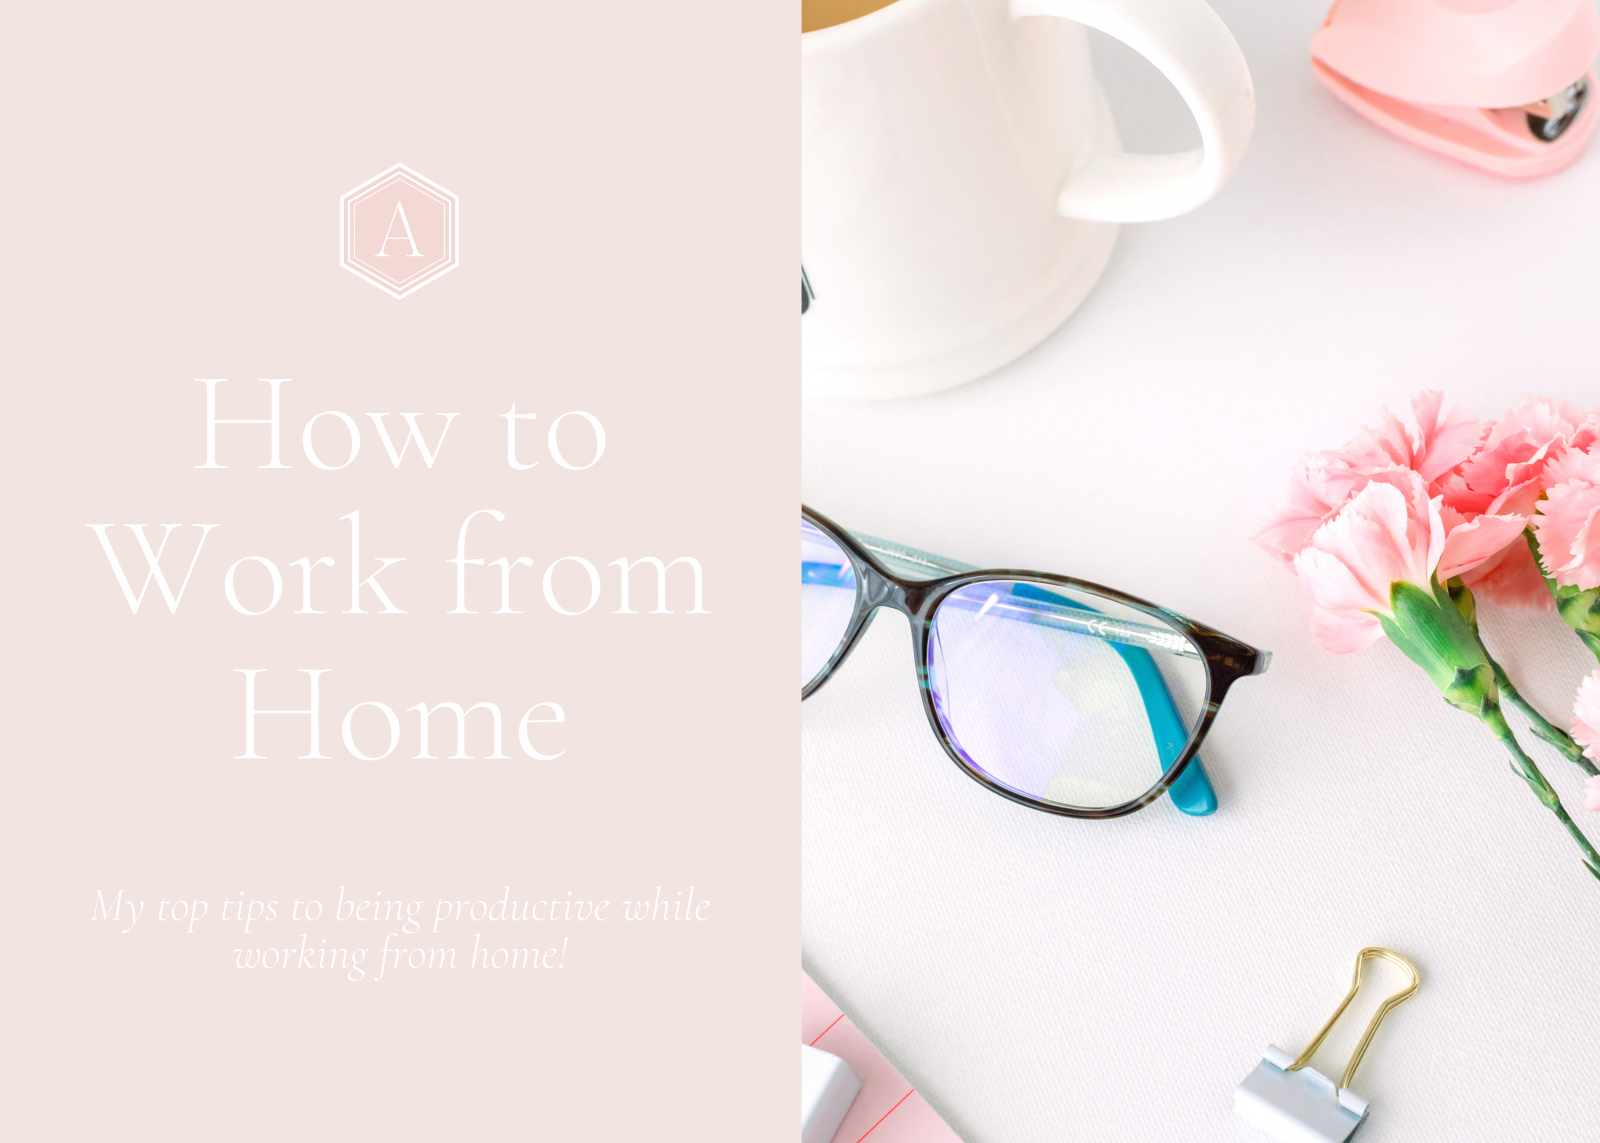 How to be Productive Working from Home